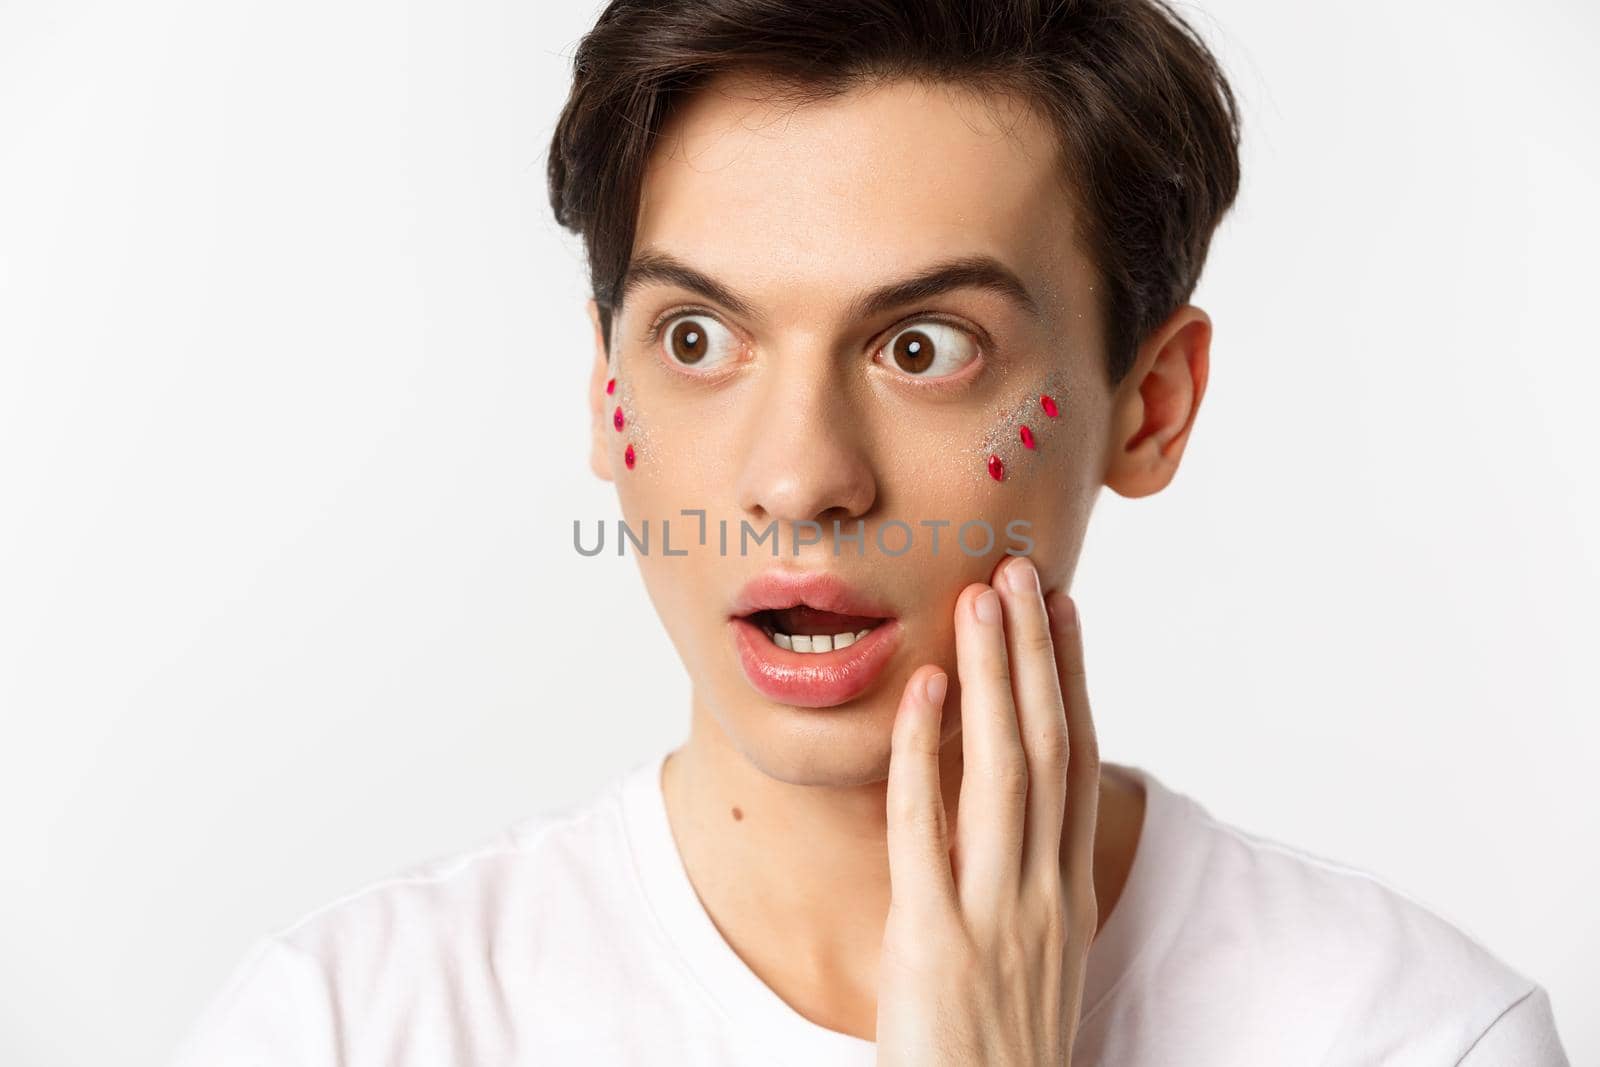 People, lgbtq and beauty concept. Headshot of gay man with glitter on face, looking left in awe, express surprise and disbelief, standing against white background.